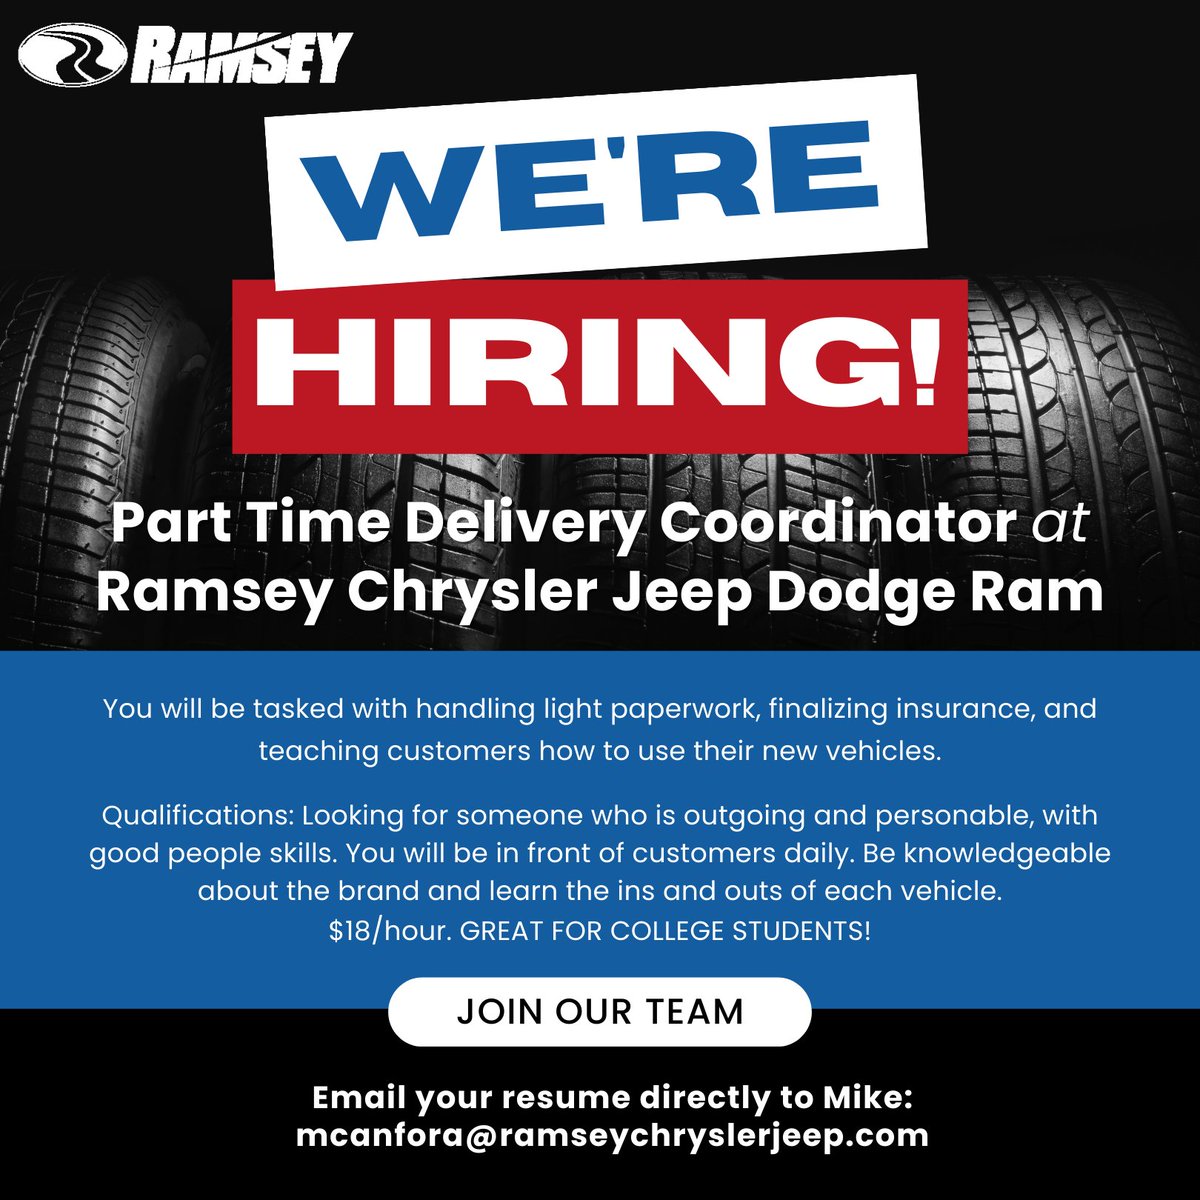 Join our award-winning team! 🏆 Ramsey Chrysler Jeep Dodge Ram is in search of part-time Delivery Coordinators! See our ad for details and send in your resume today! 

#hiring #automotive #deliverycoordinator  #ramseycars #ramseyautogroup  #jobs #njjobs #northjerseyjobs #ramseynj